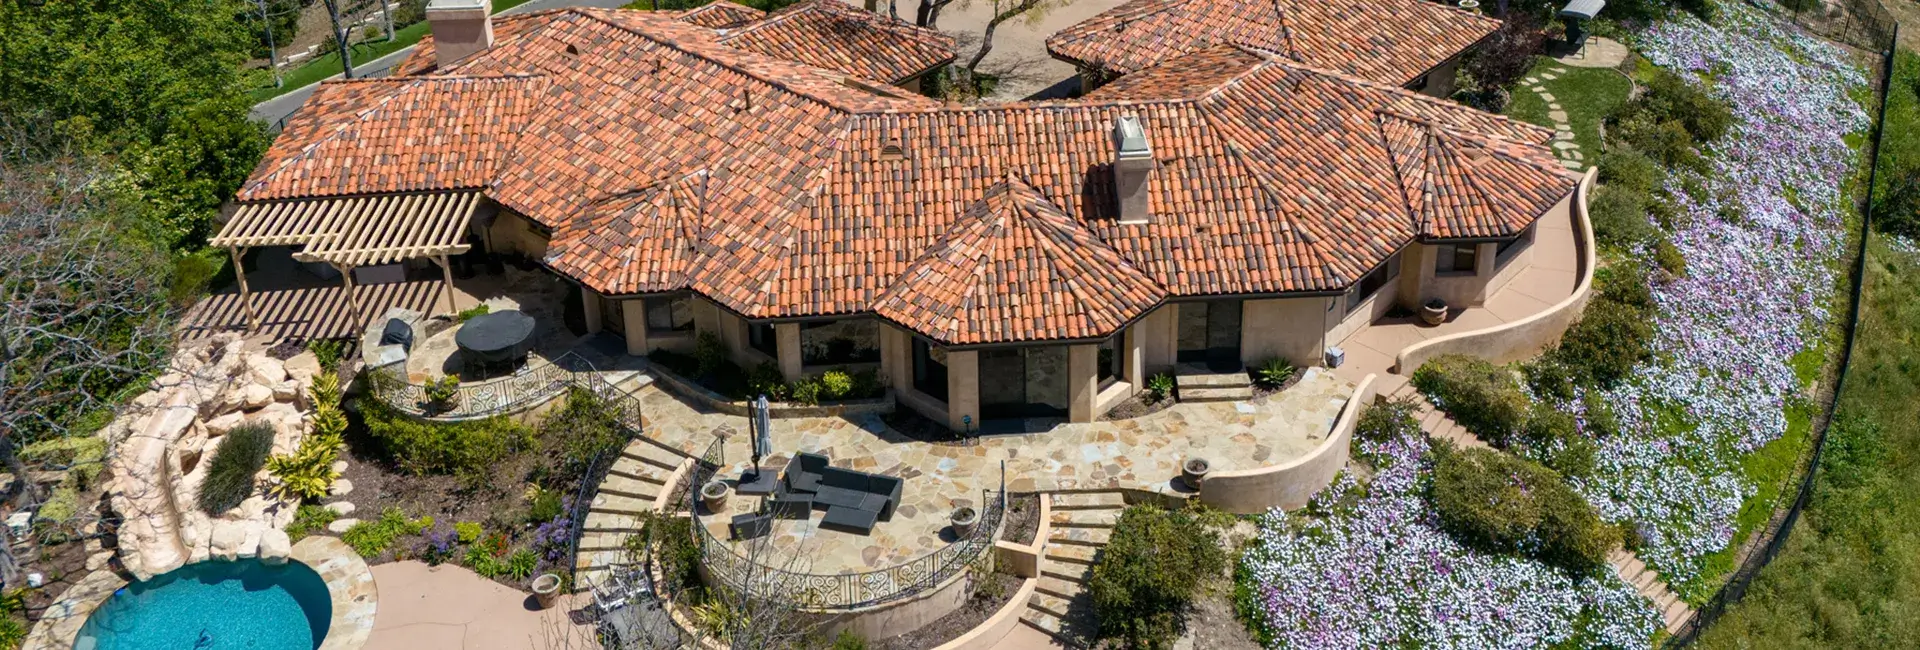 Tile roof replacement / re-roof by LocalRoofs in Westlake Village